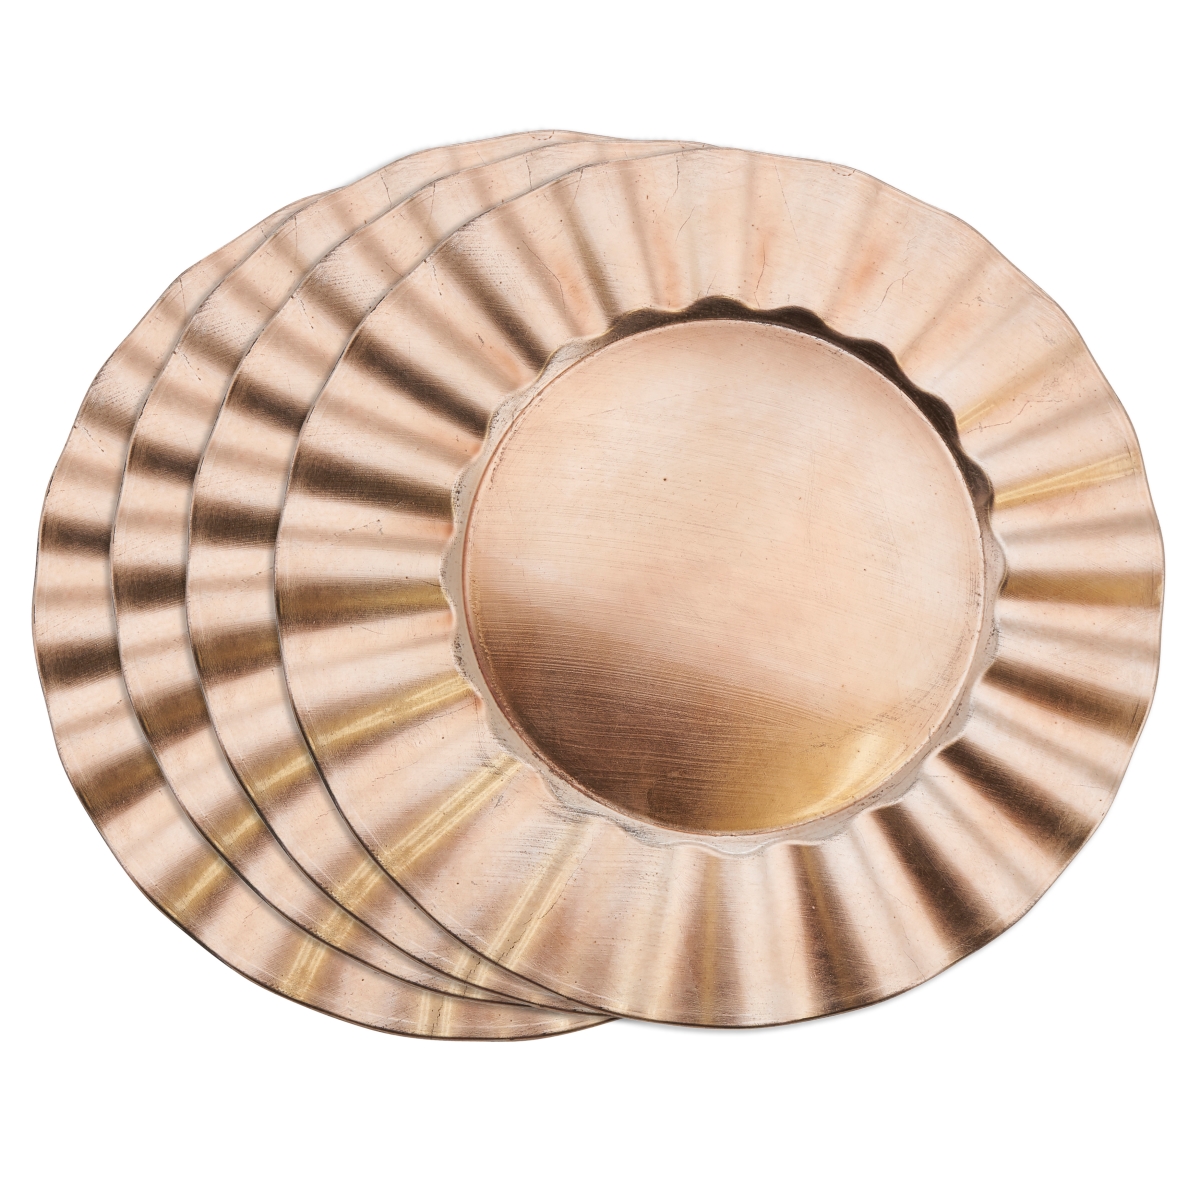 Ch205.rs13r 13 In. Round Metallic Ruffle Border Round Charger Plate - Rose, Set Of 4